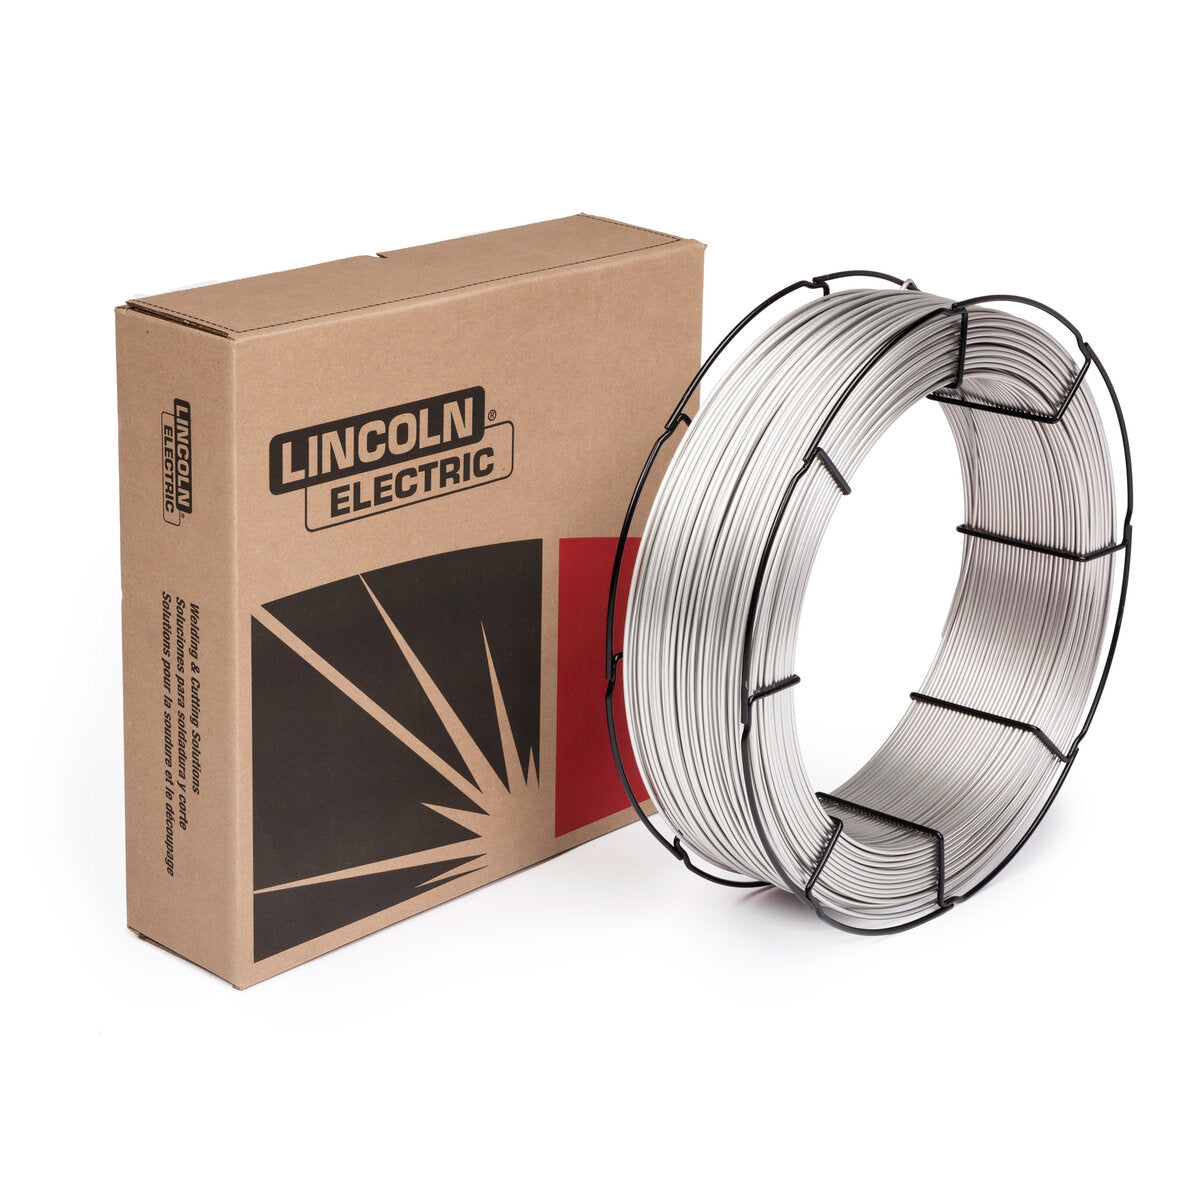 Lincoln Electric - Techalloy® 625 Submerged Arc (SAW) Wire, 3/32 in, 55 lb Basket - SA625093726